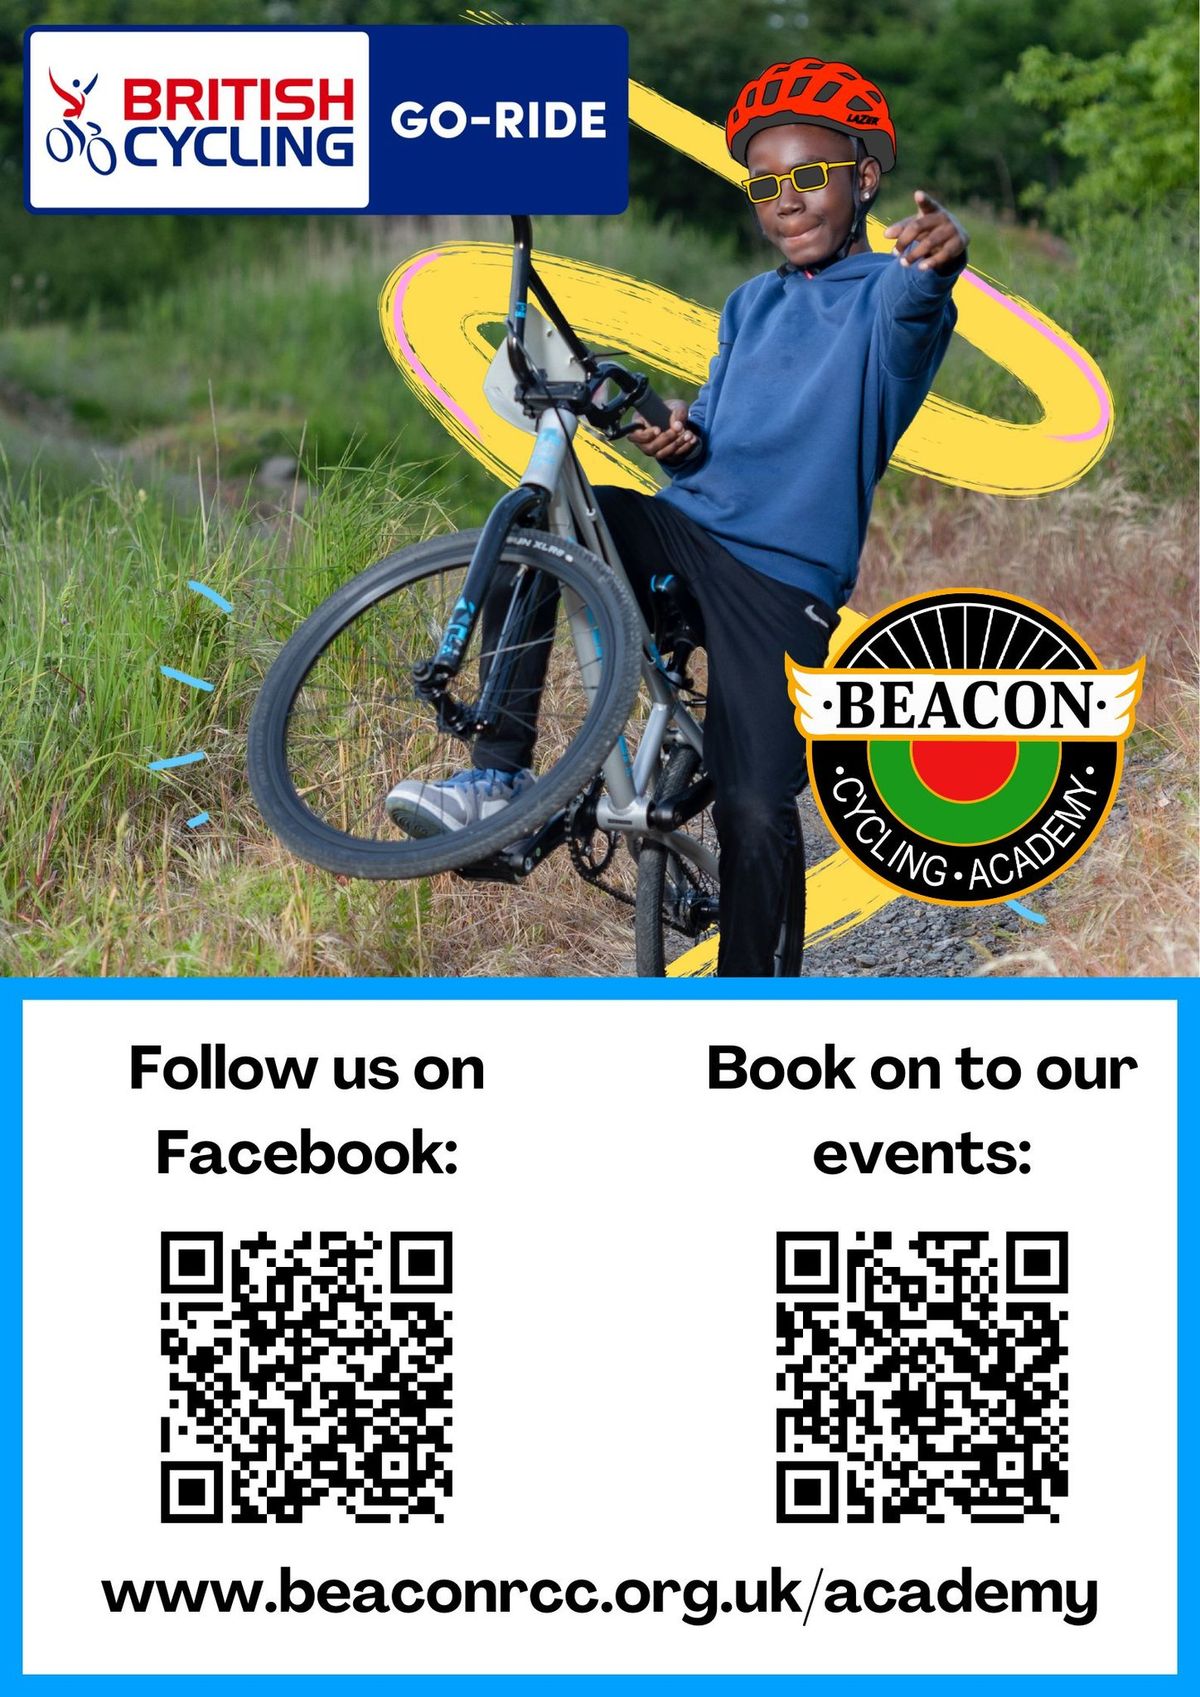 Beacon Academy Summer of Cycling sessions for fun and fitness